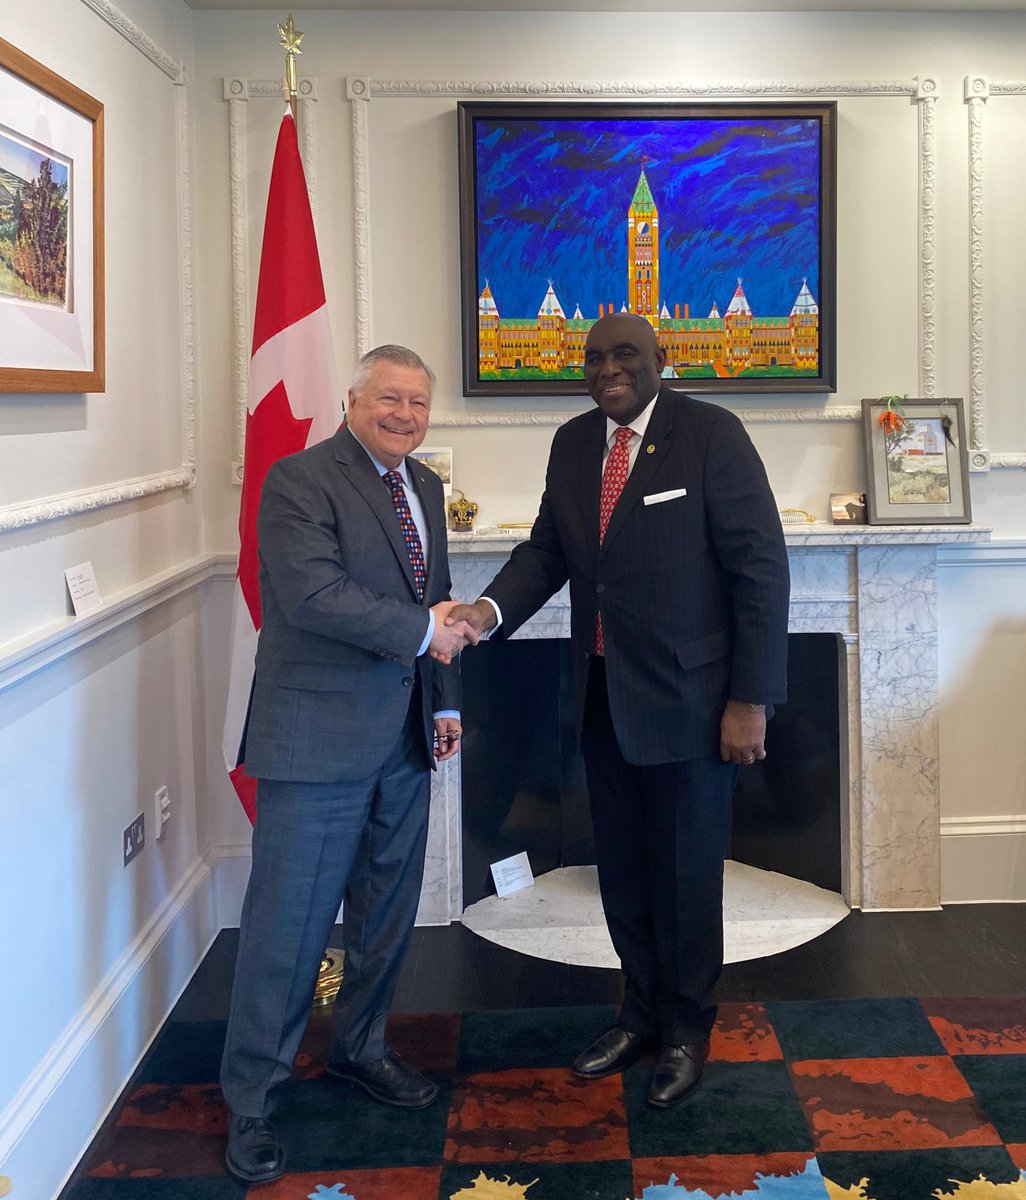 High Commissioner @RalphGoodale was pleased to welcome Ghana's High Commissioner @powusuankomah to #CanadaHouse yesterday to discuss the #Commonwealth and our shared values. 🇨🇦🤝🇬🇭